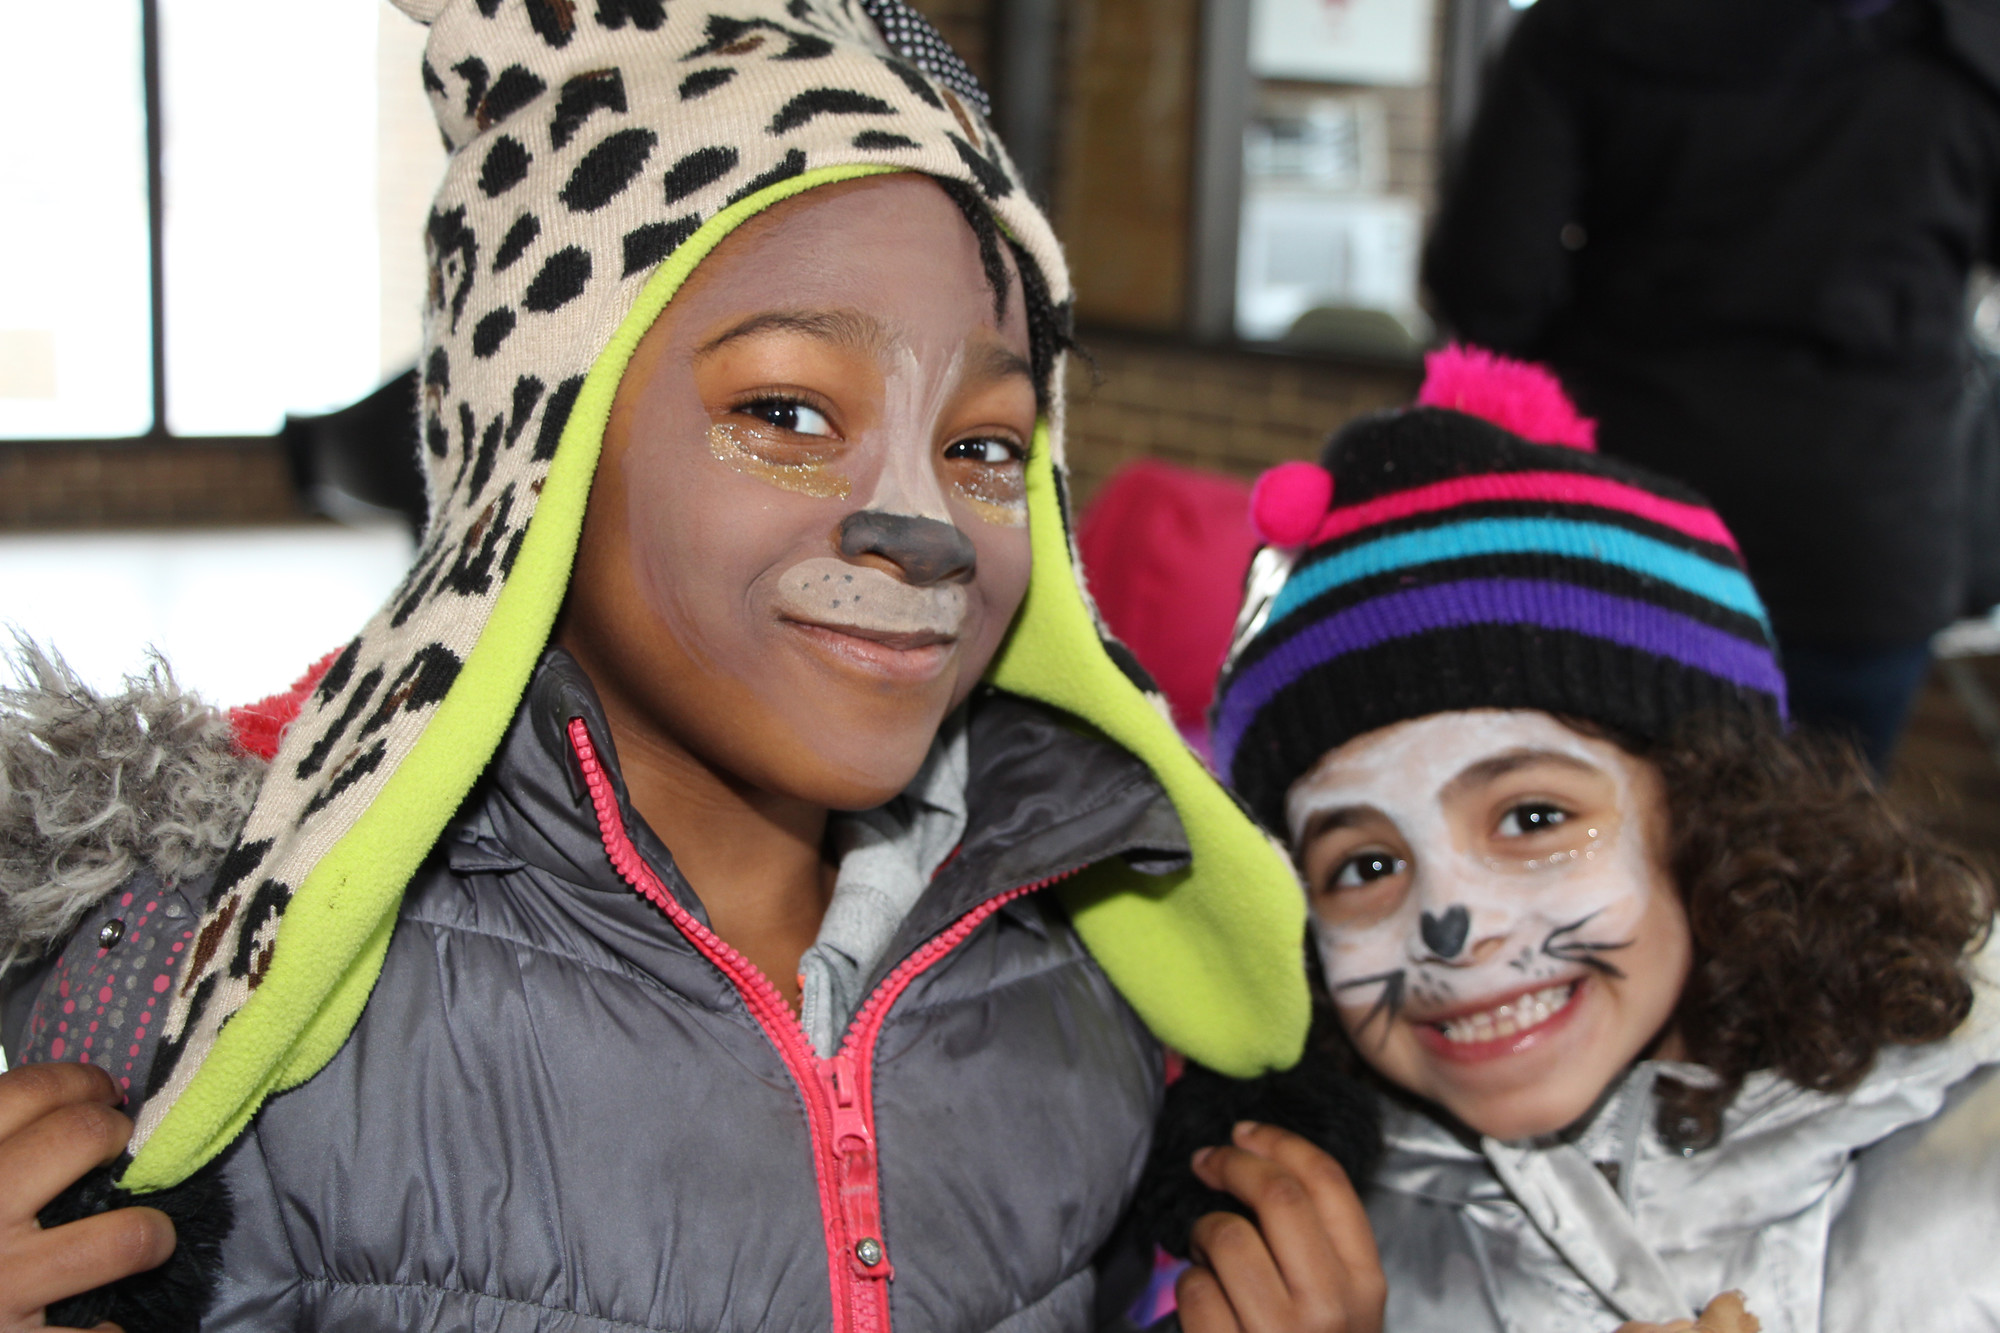 Gabrielle Johnson, 6, left, and Amagansett Pu-Folkes, 6, were bundled up while hunting for eggs.